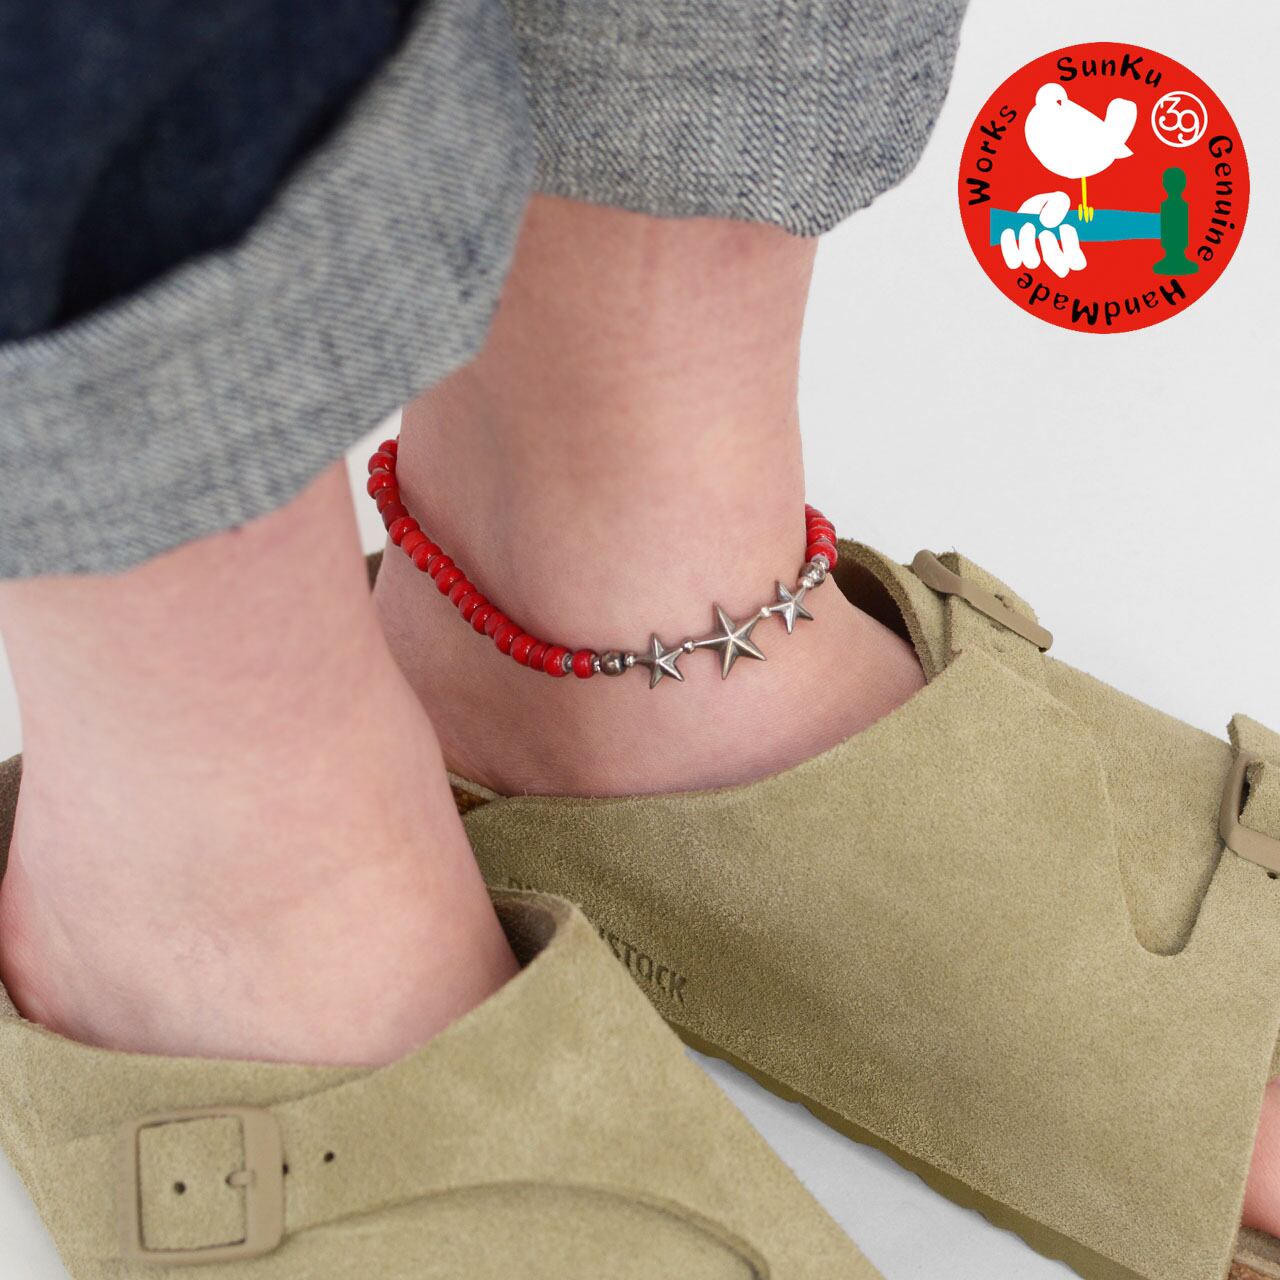 Sunku 39 [サンク] Star Beads Anklet [SK-144-RED] スタービーズ